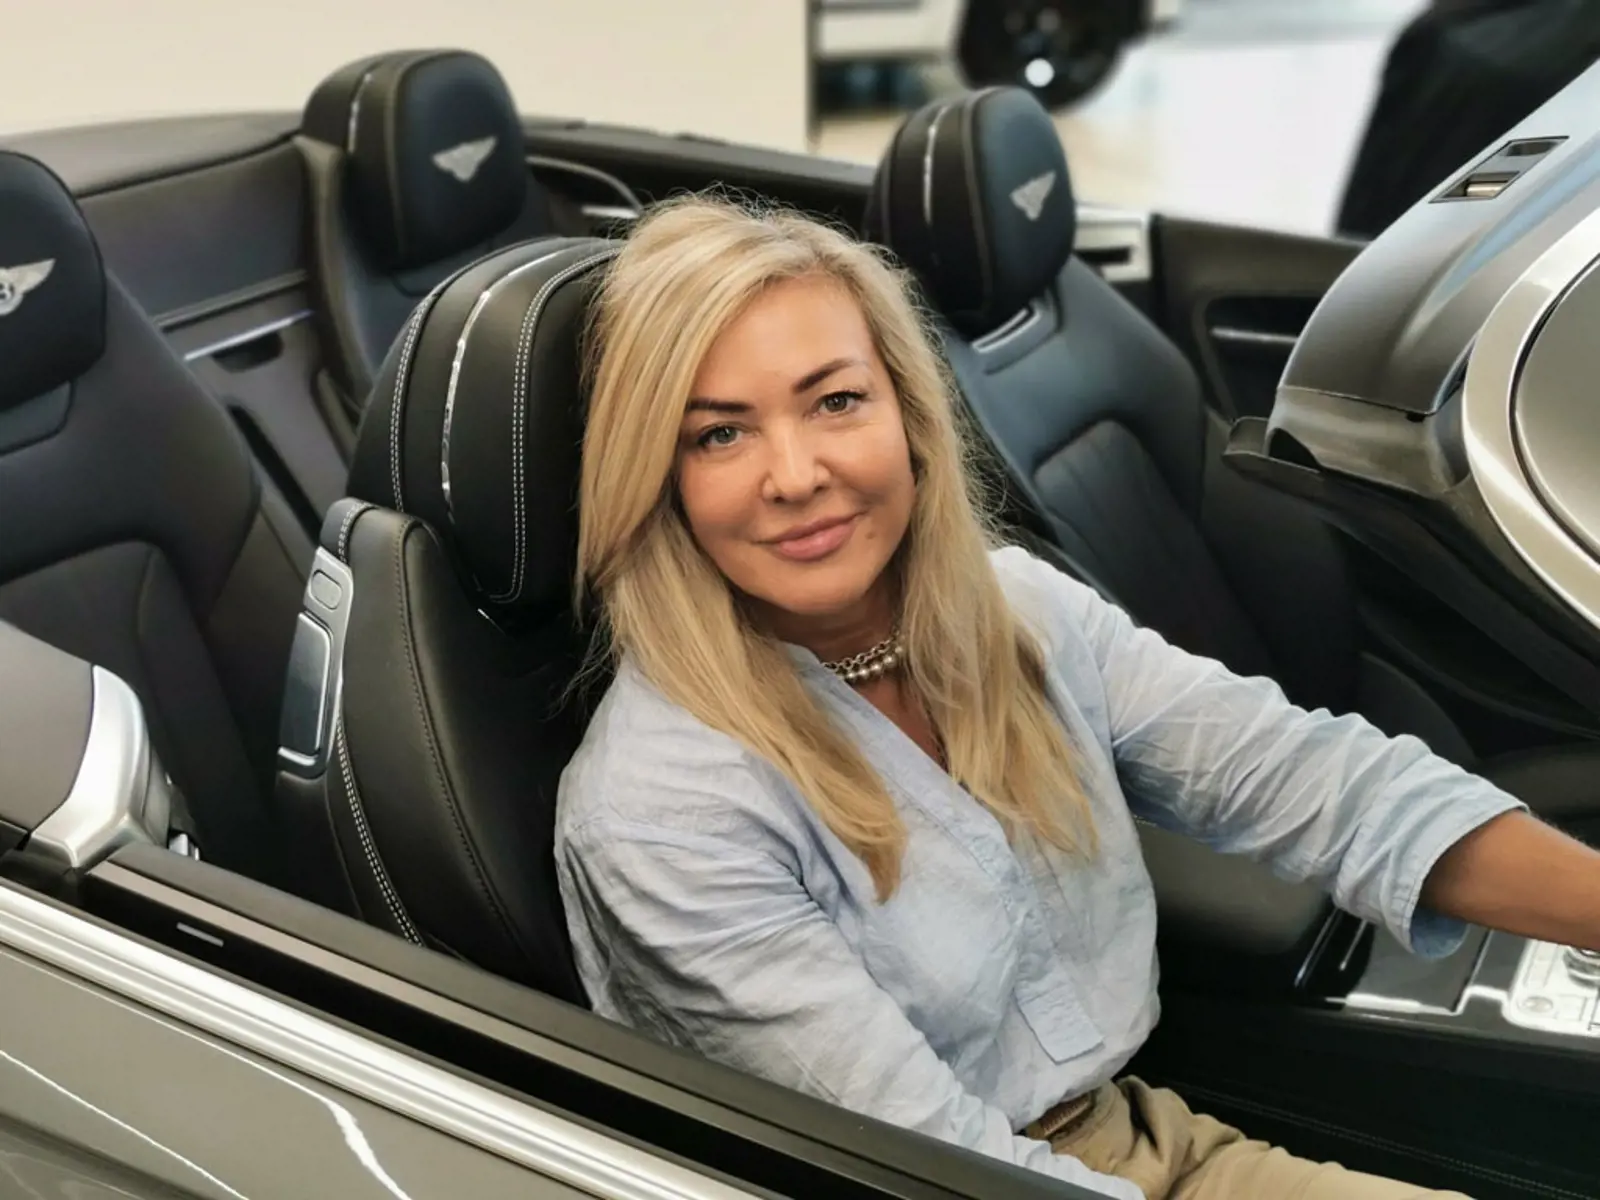 Sarah takes us through her motoring expertise and Sales Executive role that brings the opportunity to learn something new every day.